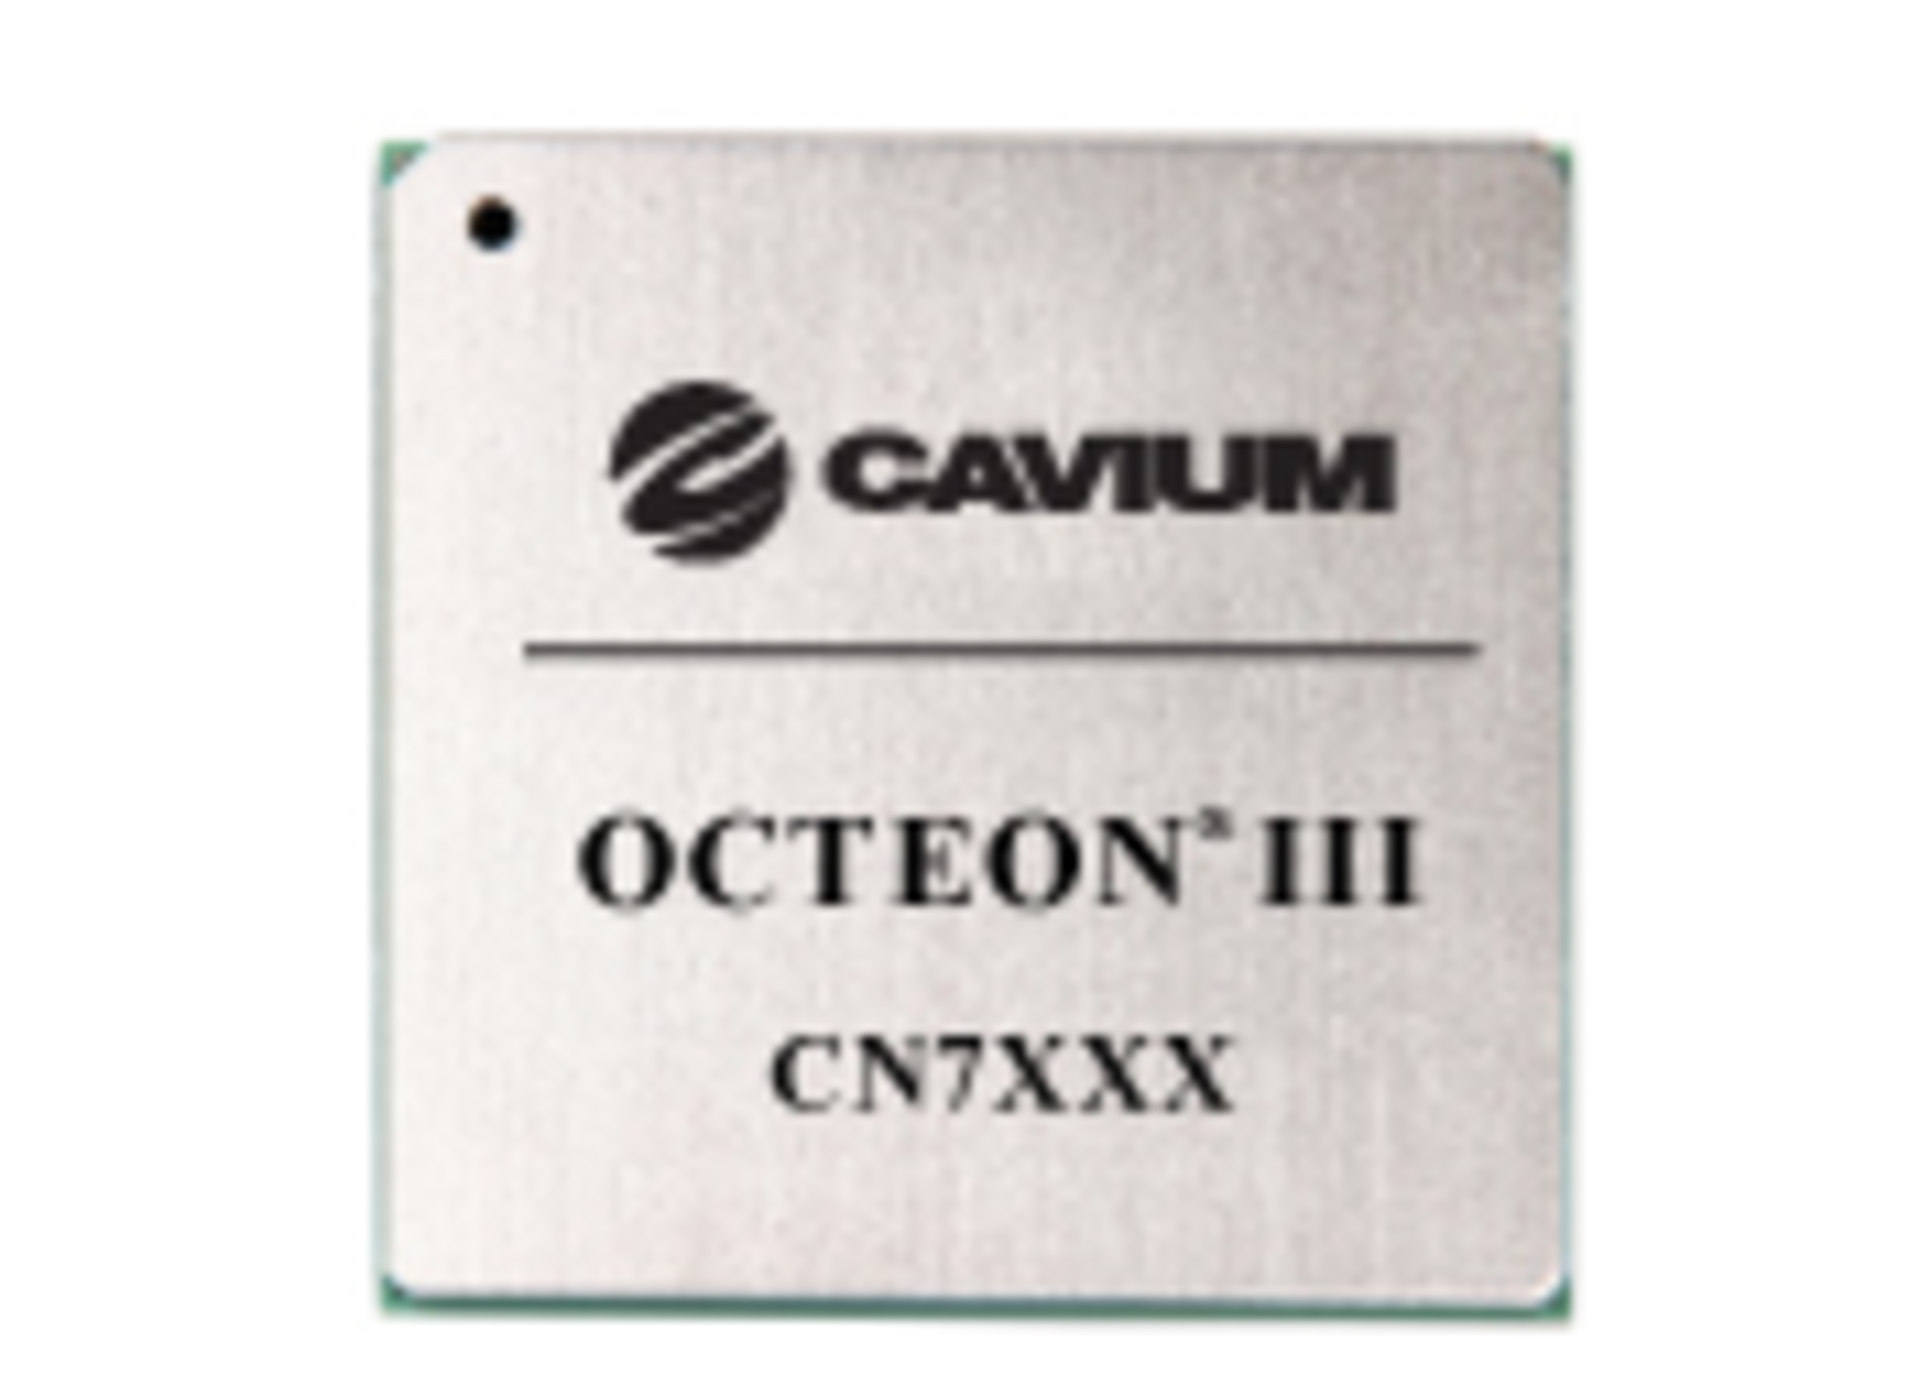 Marvell/ Cavium Semiconductor OCTEON III CN7890 Processor, QTY 3; Pass 2.0; AAP Option; 1.6GHz;